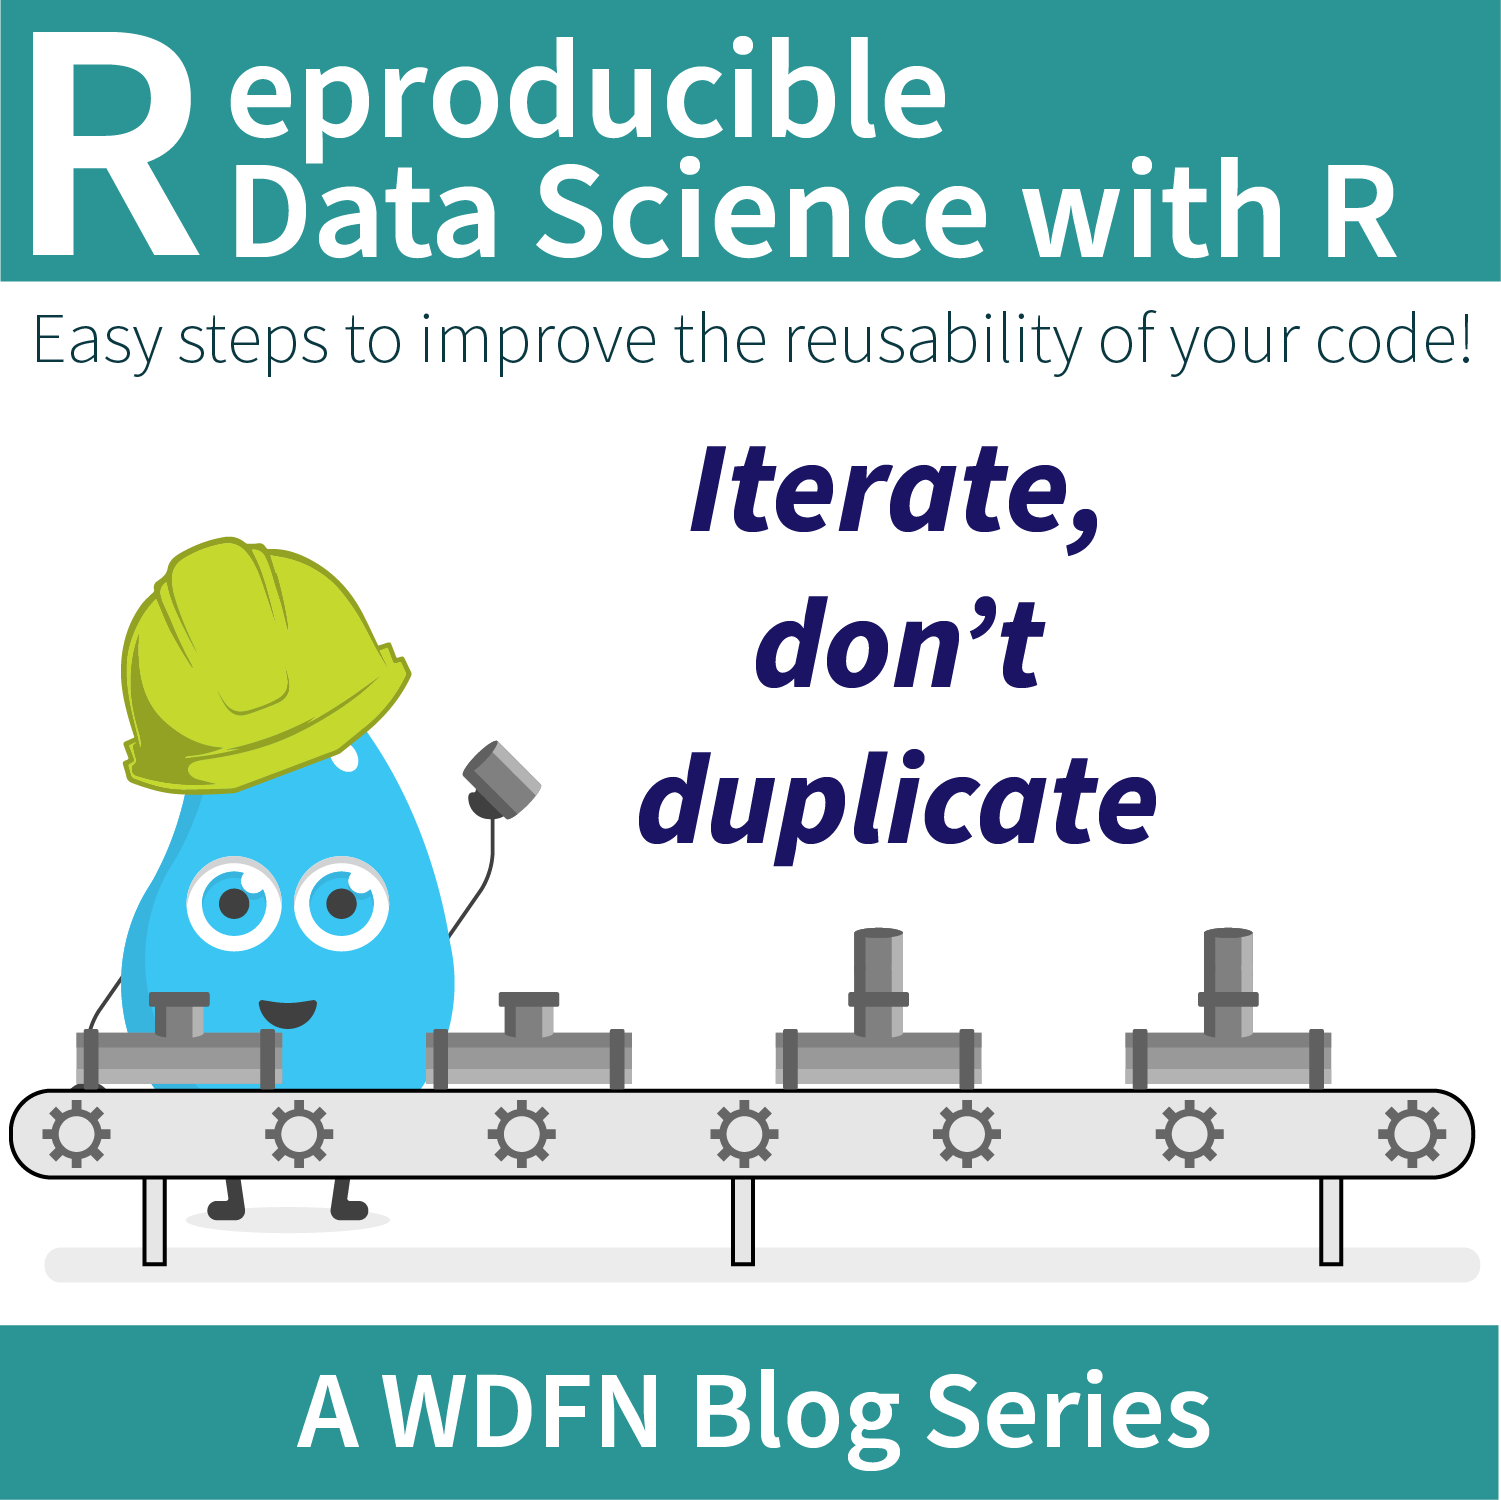 Reproducible Data Science in R: Iterate, don't duplicate